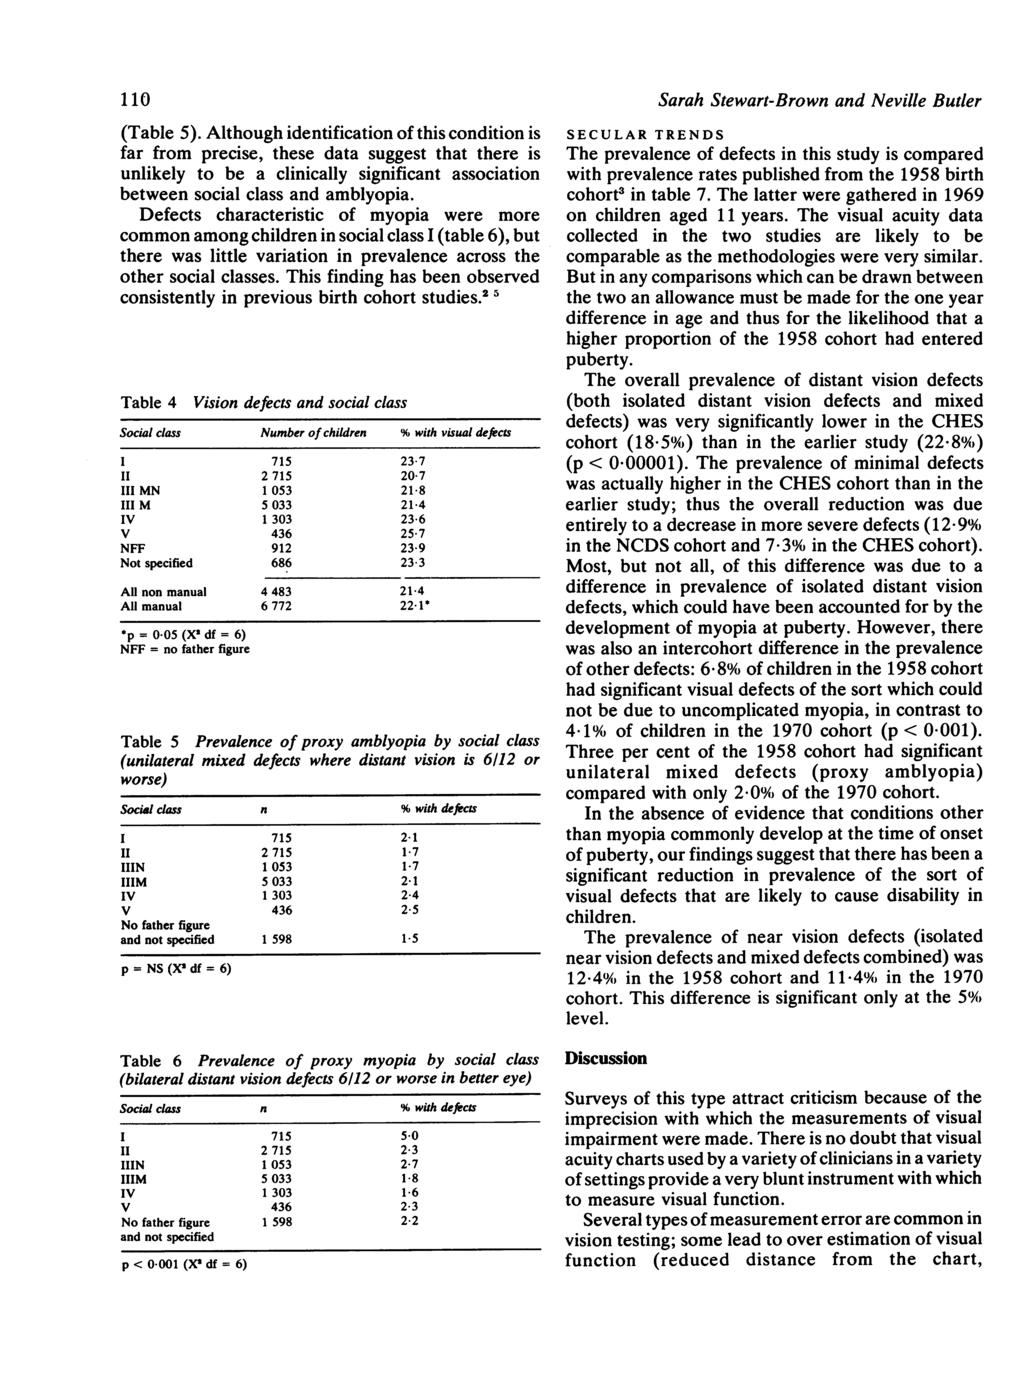 110 (Table 5). Although identification of this condition is far from precise, these data suggest that there is unlikely to be a clinically significant association between social class and amblyopia.